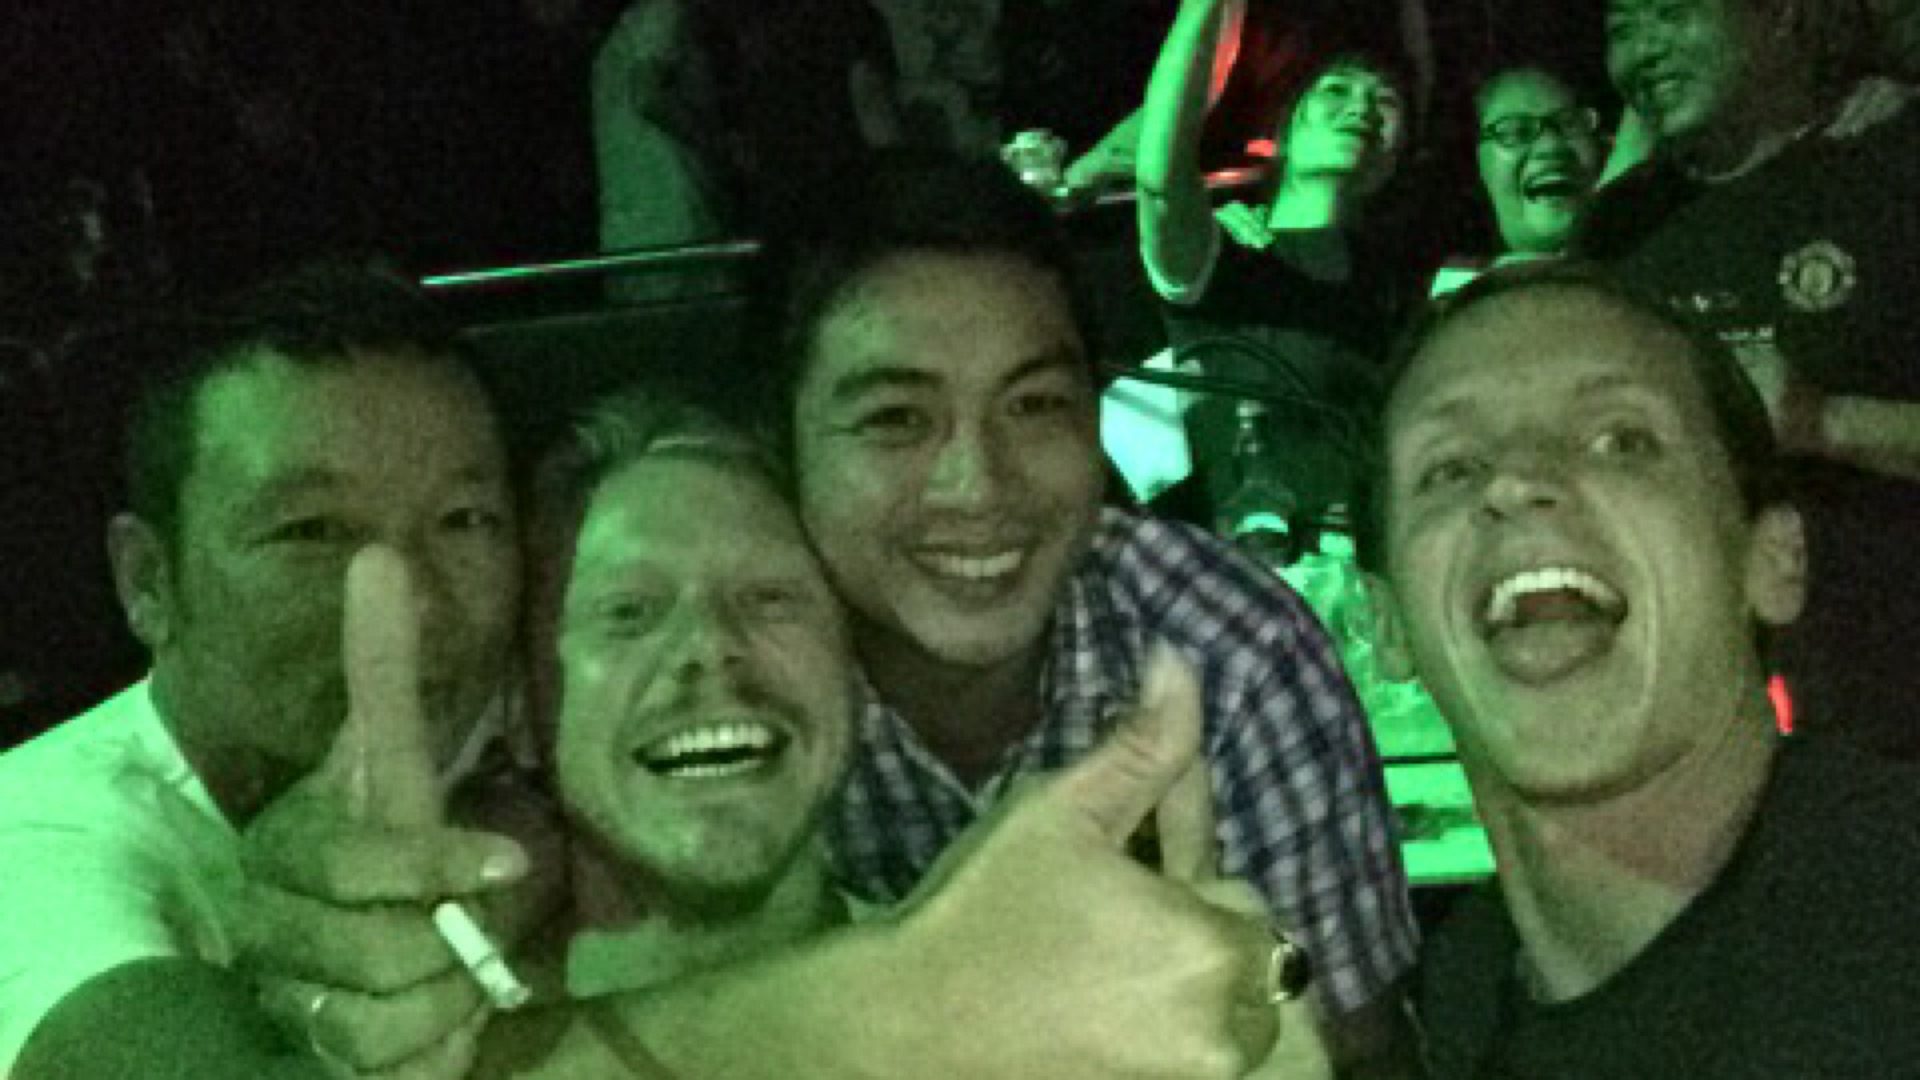 David Simpson and a friend with some locals at a club in Quy Nhon, Vietnam. The Vietnamese clubs